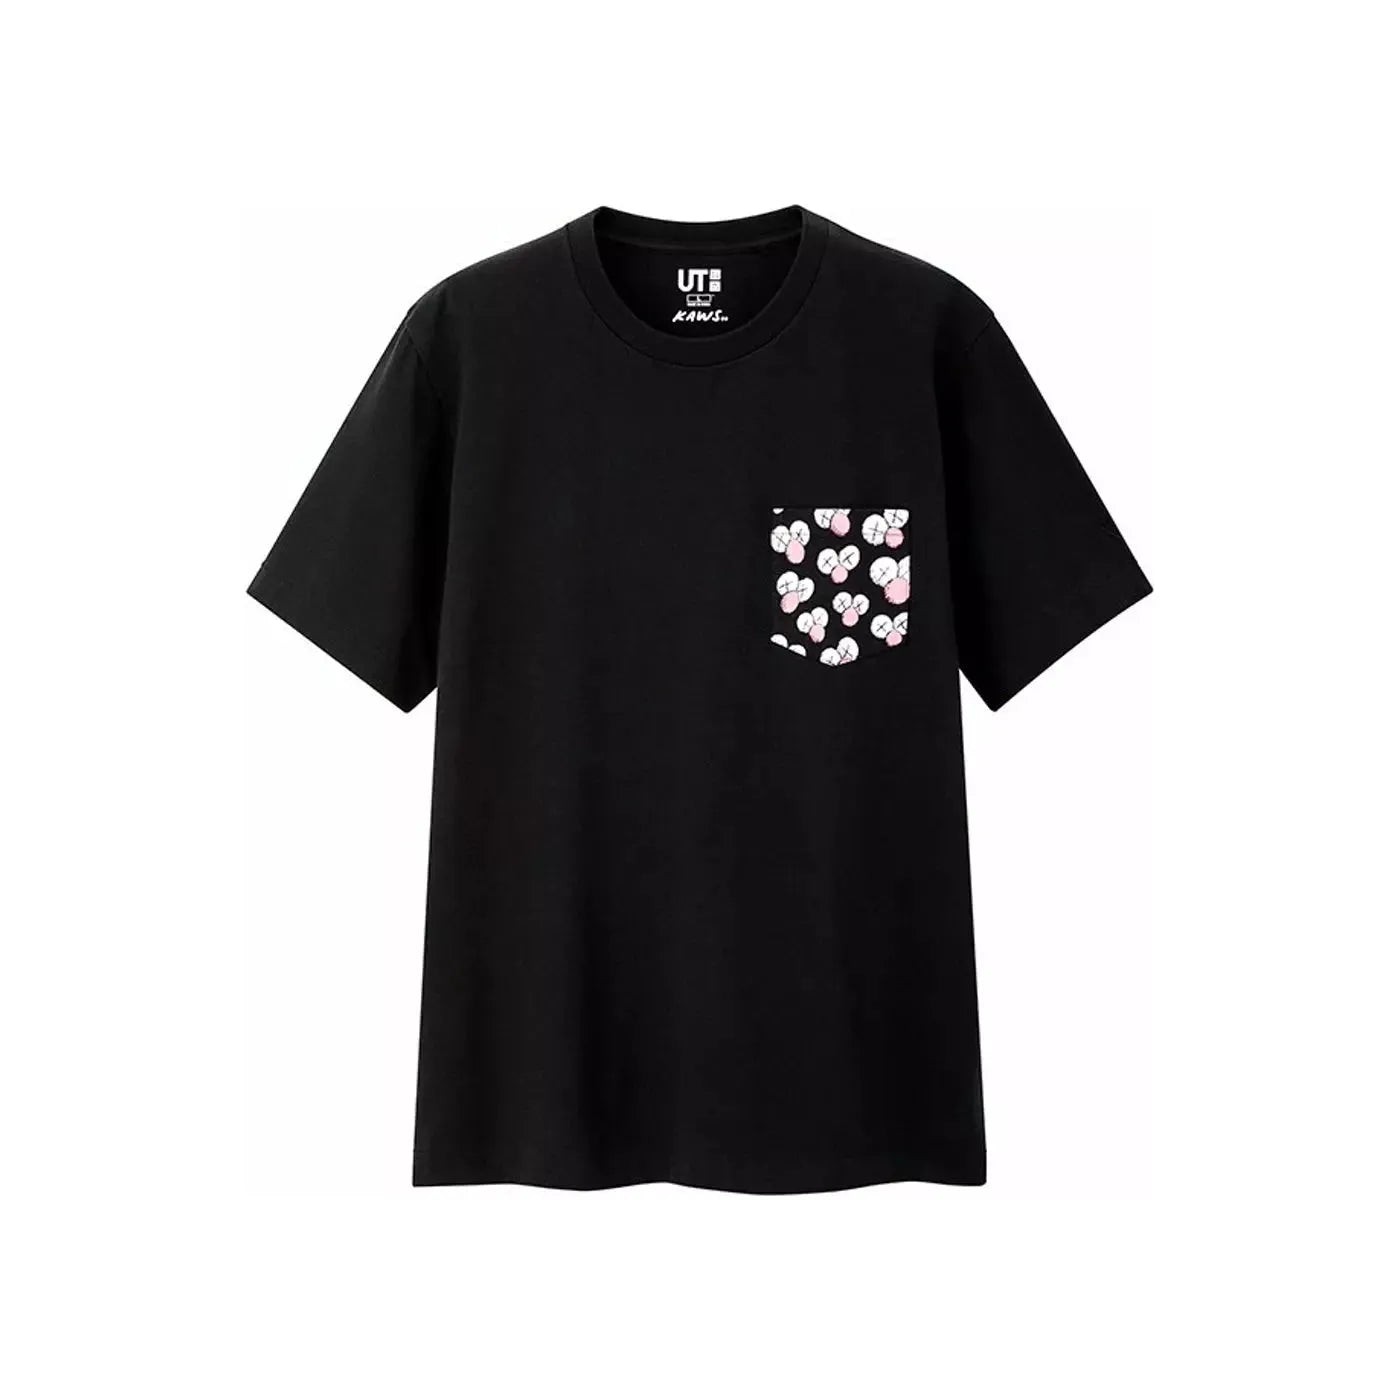 KAWS X Uniqlo Tokyo First Kids Tee Asia Sizing Graphic Tee Set for Men